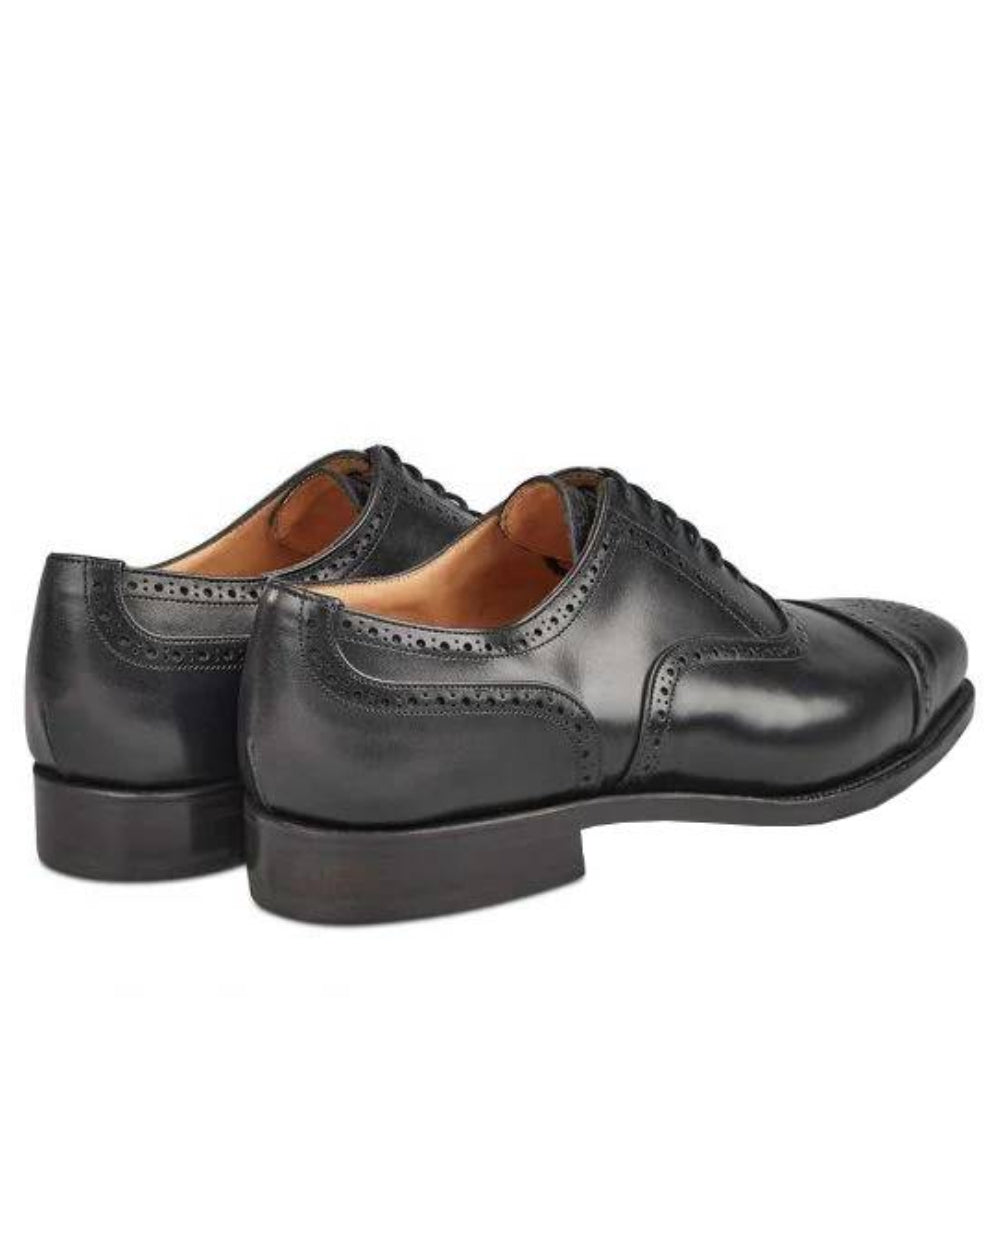 Black Coloured Trickers Kensington Leather Sole Toecap Oxford City Shoe On A White Background 